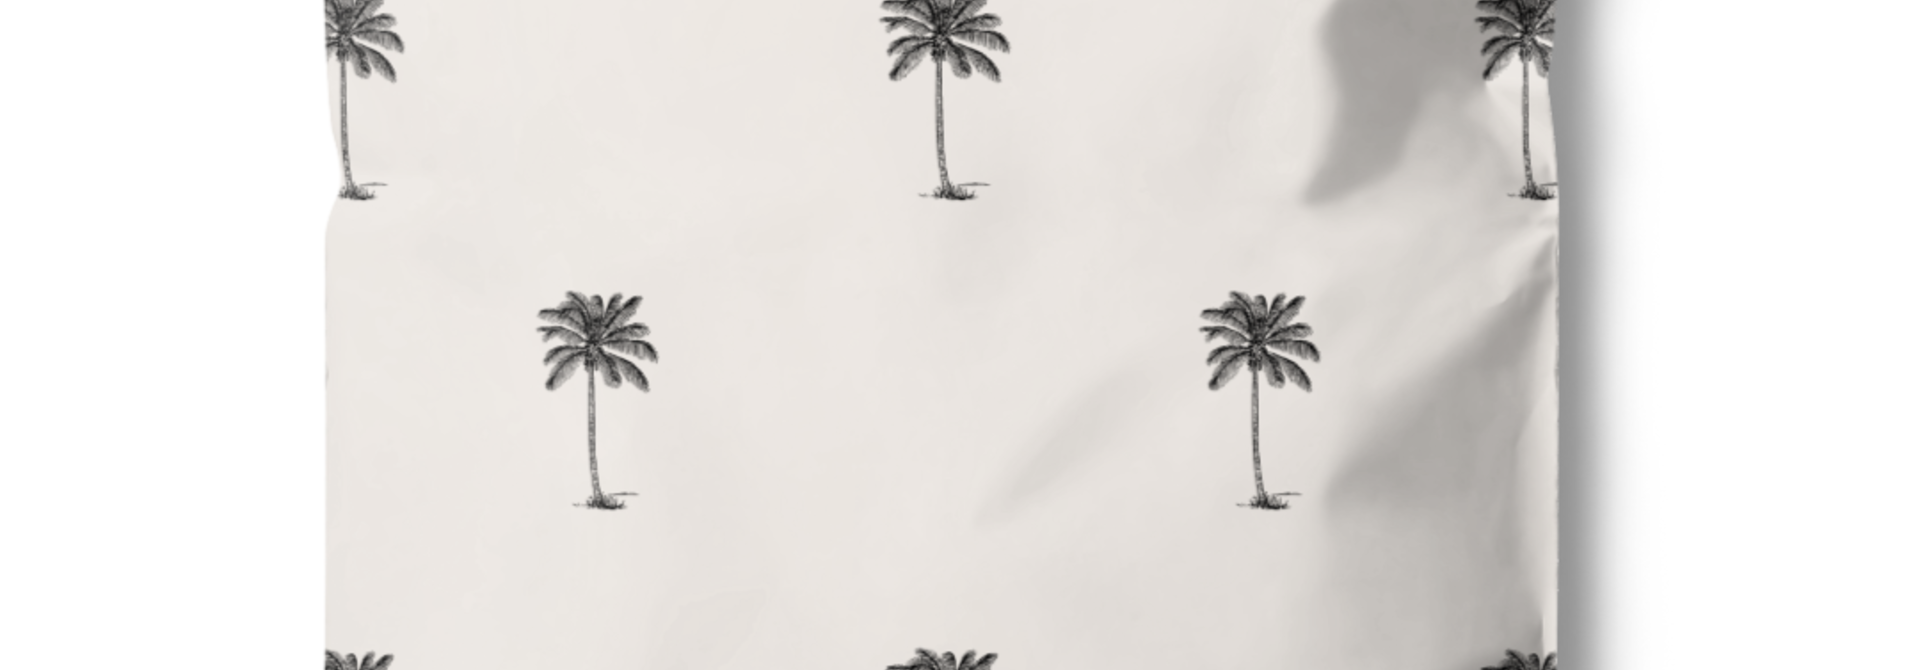 Shipping bag with palmtrees